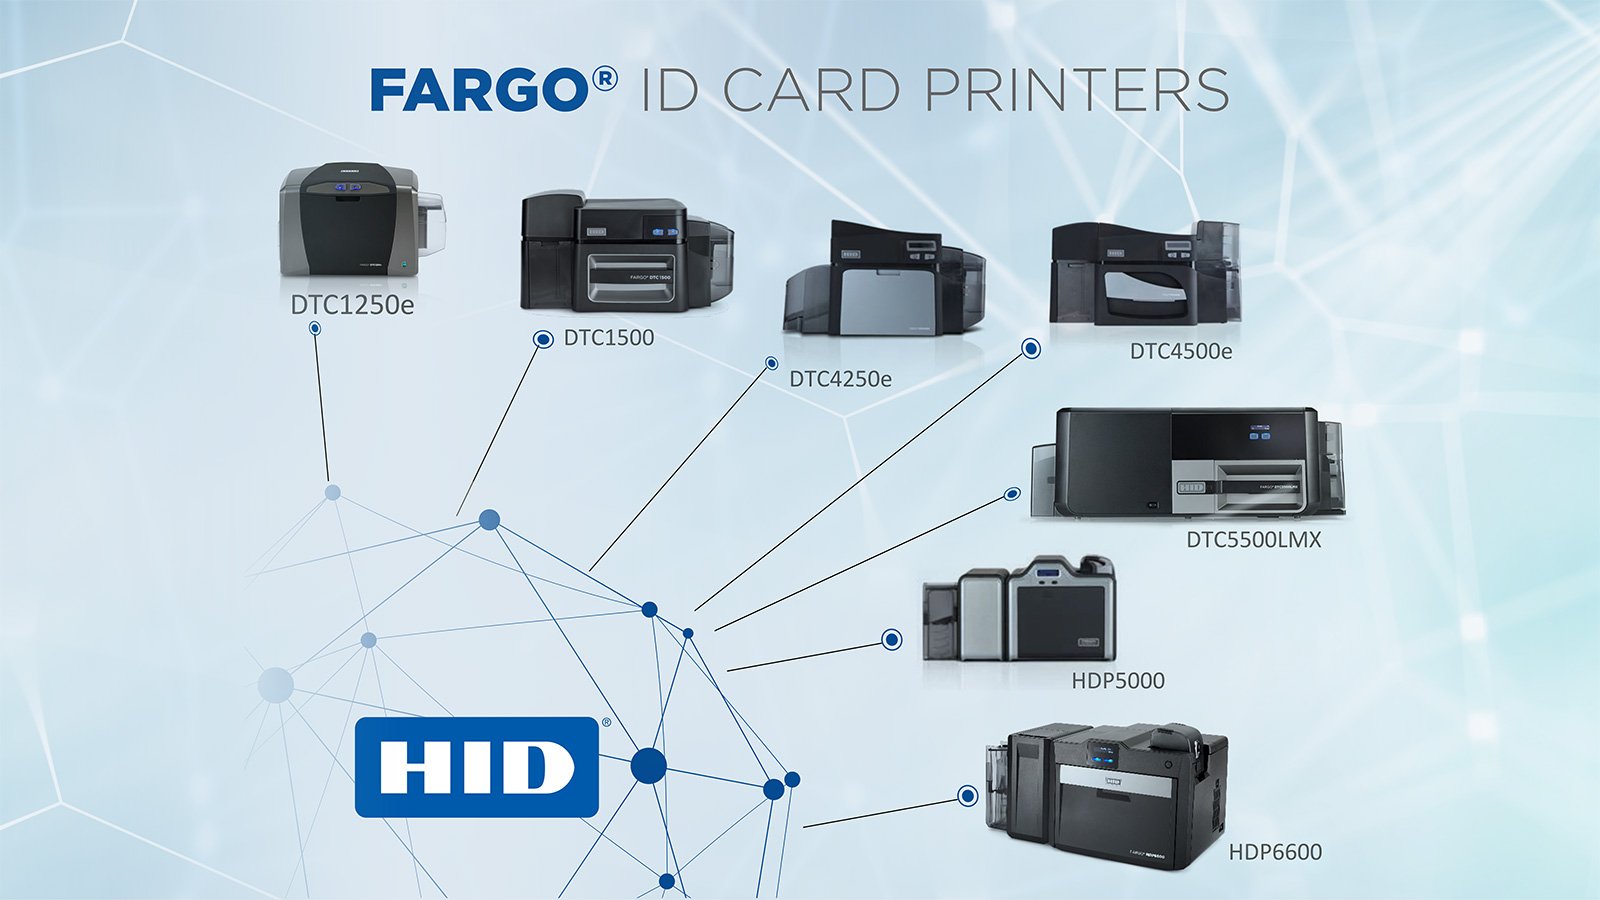 Overview of Fargo® ID Card Printer Systems